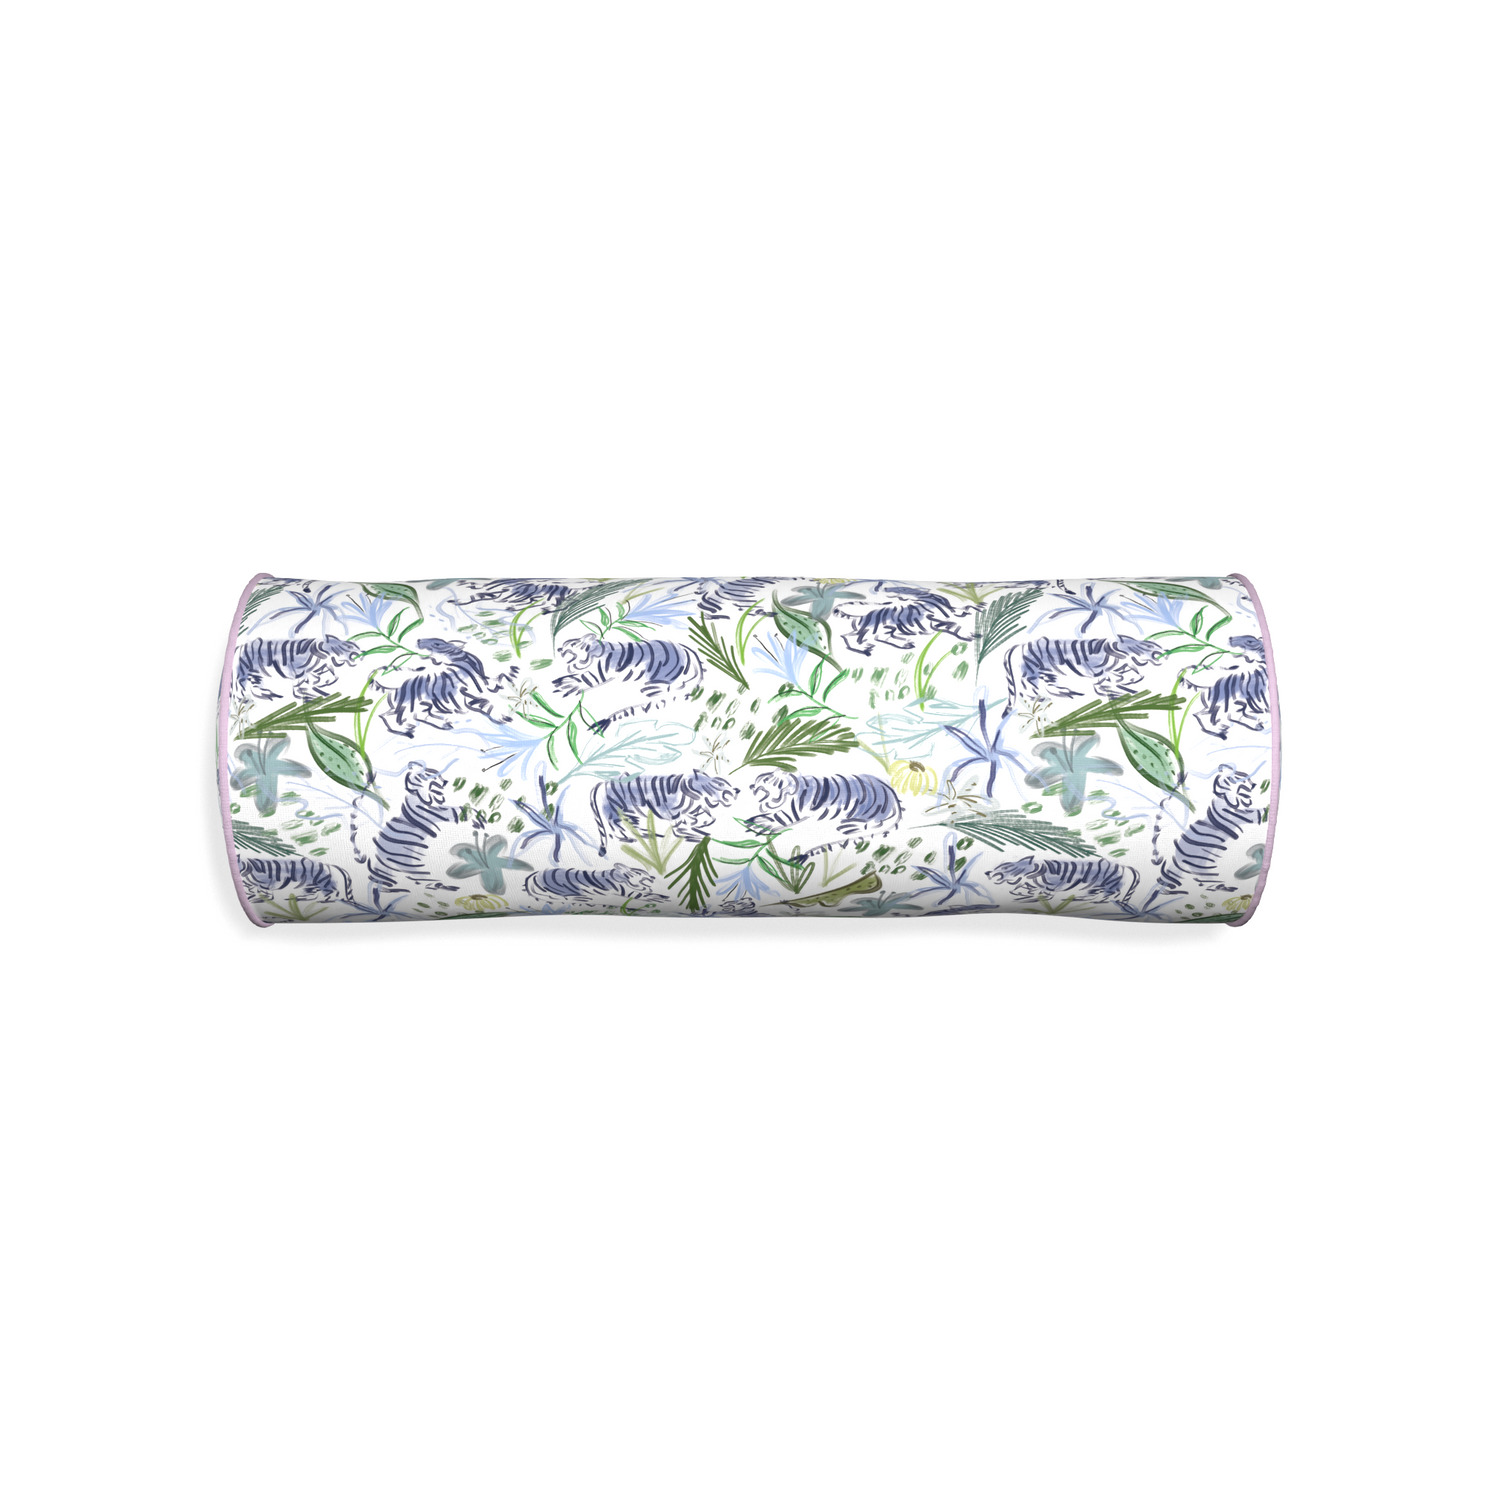 Bolster frida green custom pillow with l piping on white background